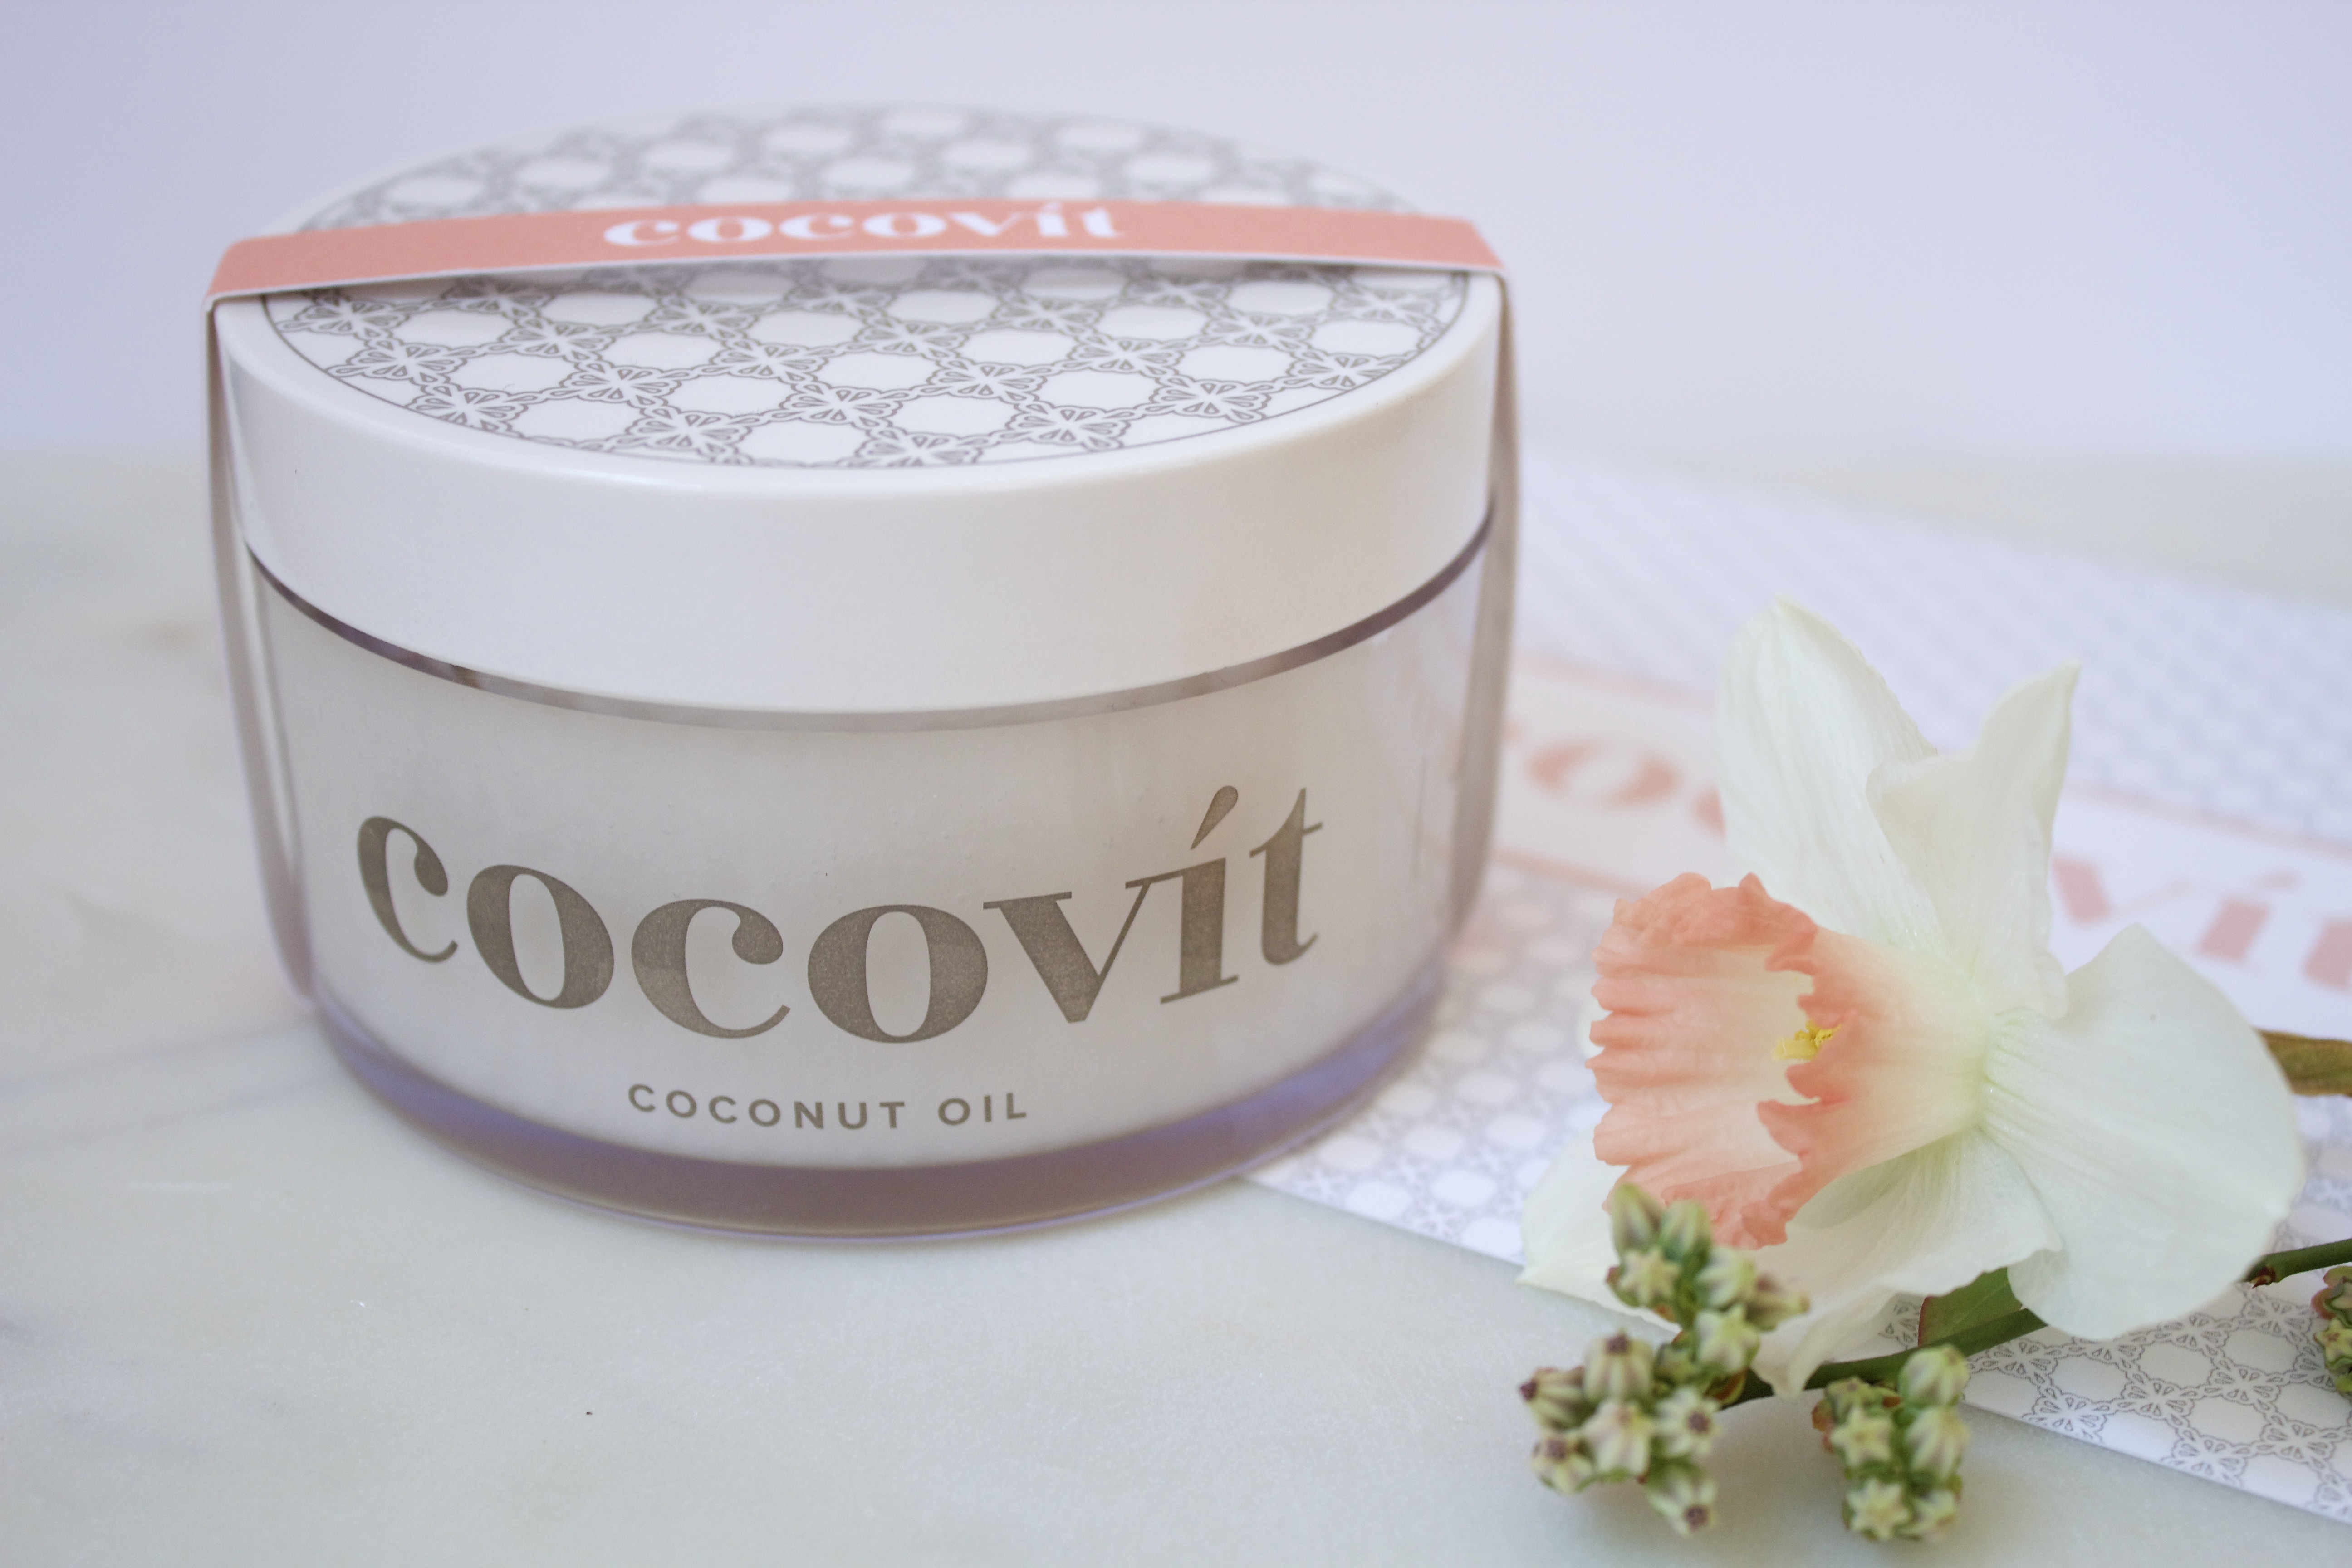 Discovering Cocovít + Giveaway